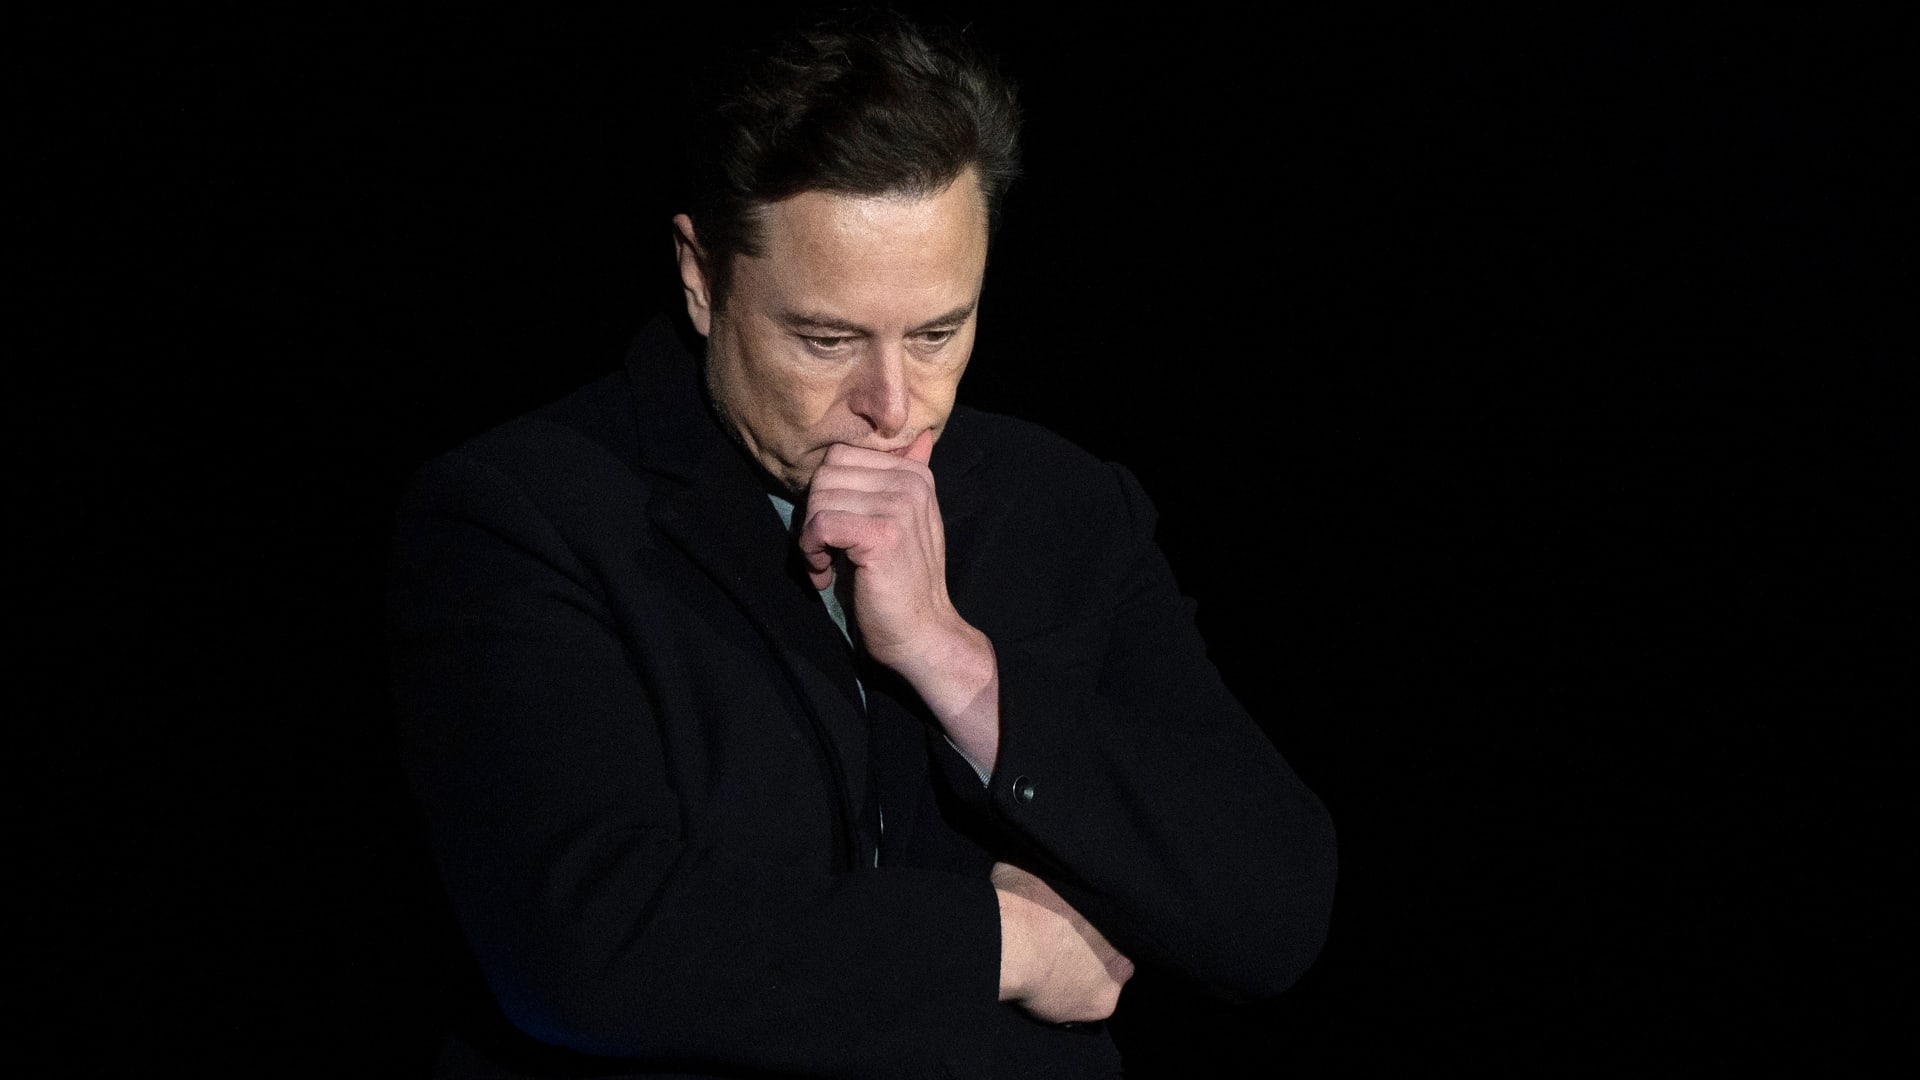 Elon Musk had a strange and awkward week — here’s what happened at Tesla, SpaceX and Twitter